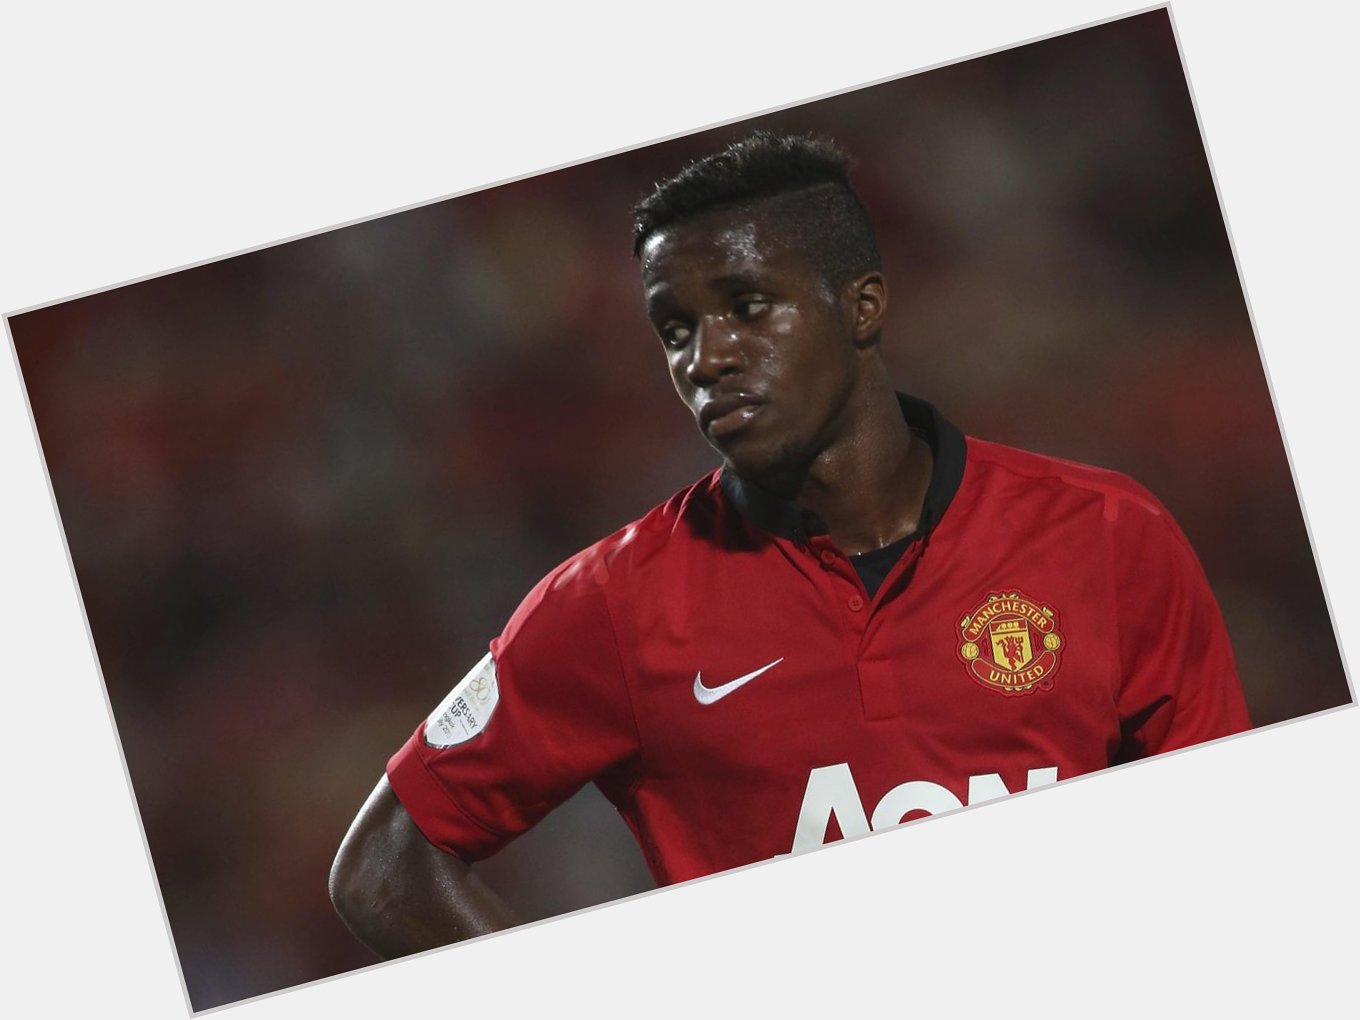 Happy birthday to Wilfried Zaha. The on-loan Manchester United player turns 22 today. 